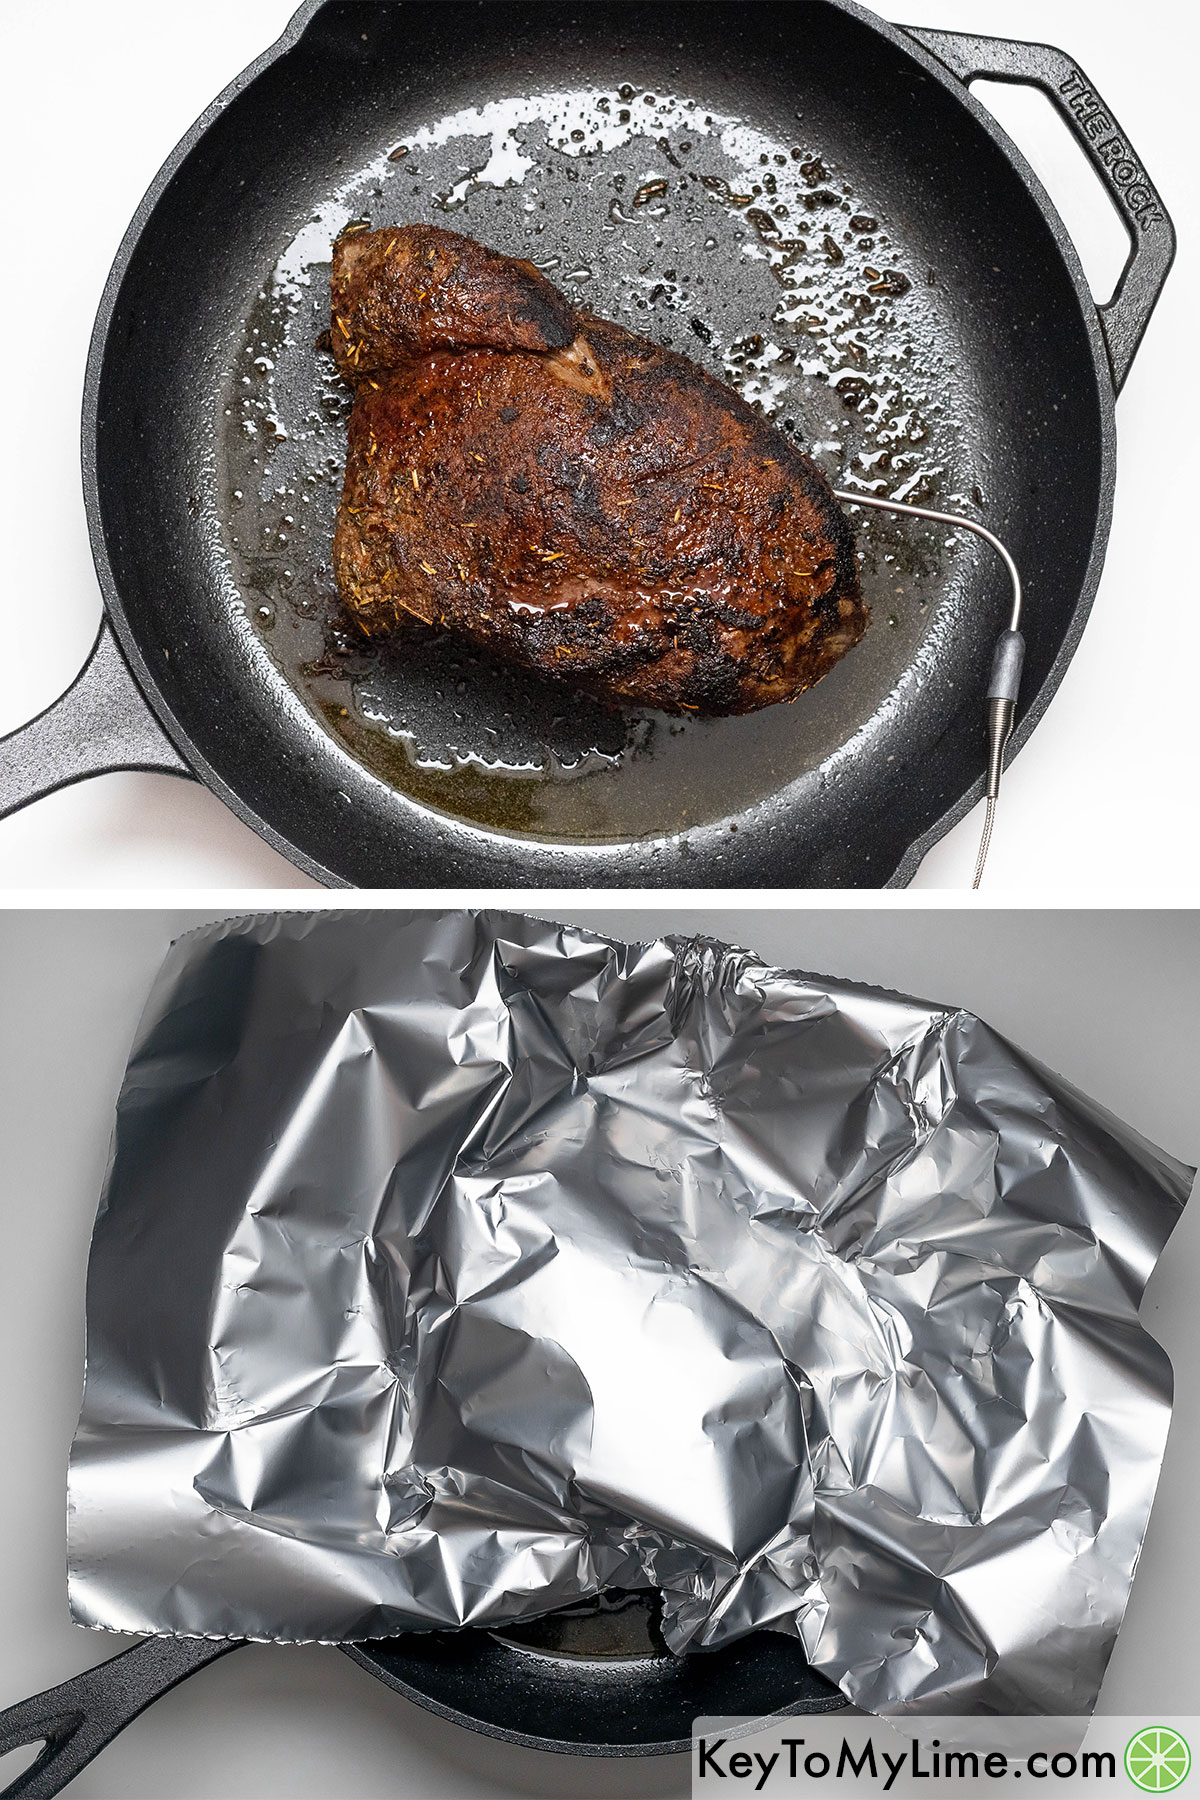 Baking the roast until reaching a temperature of 130F, and then tenting with aluminum foil and resting.